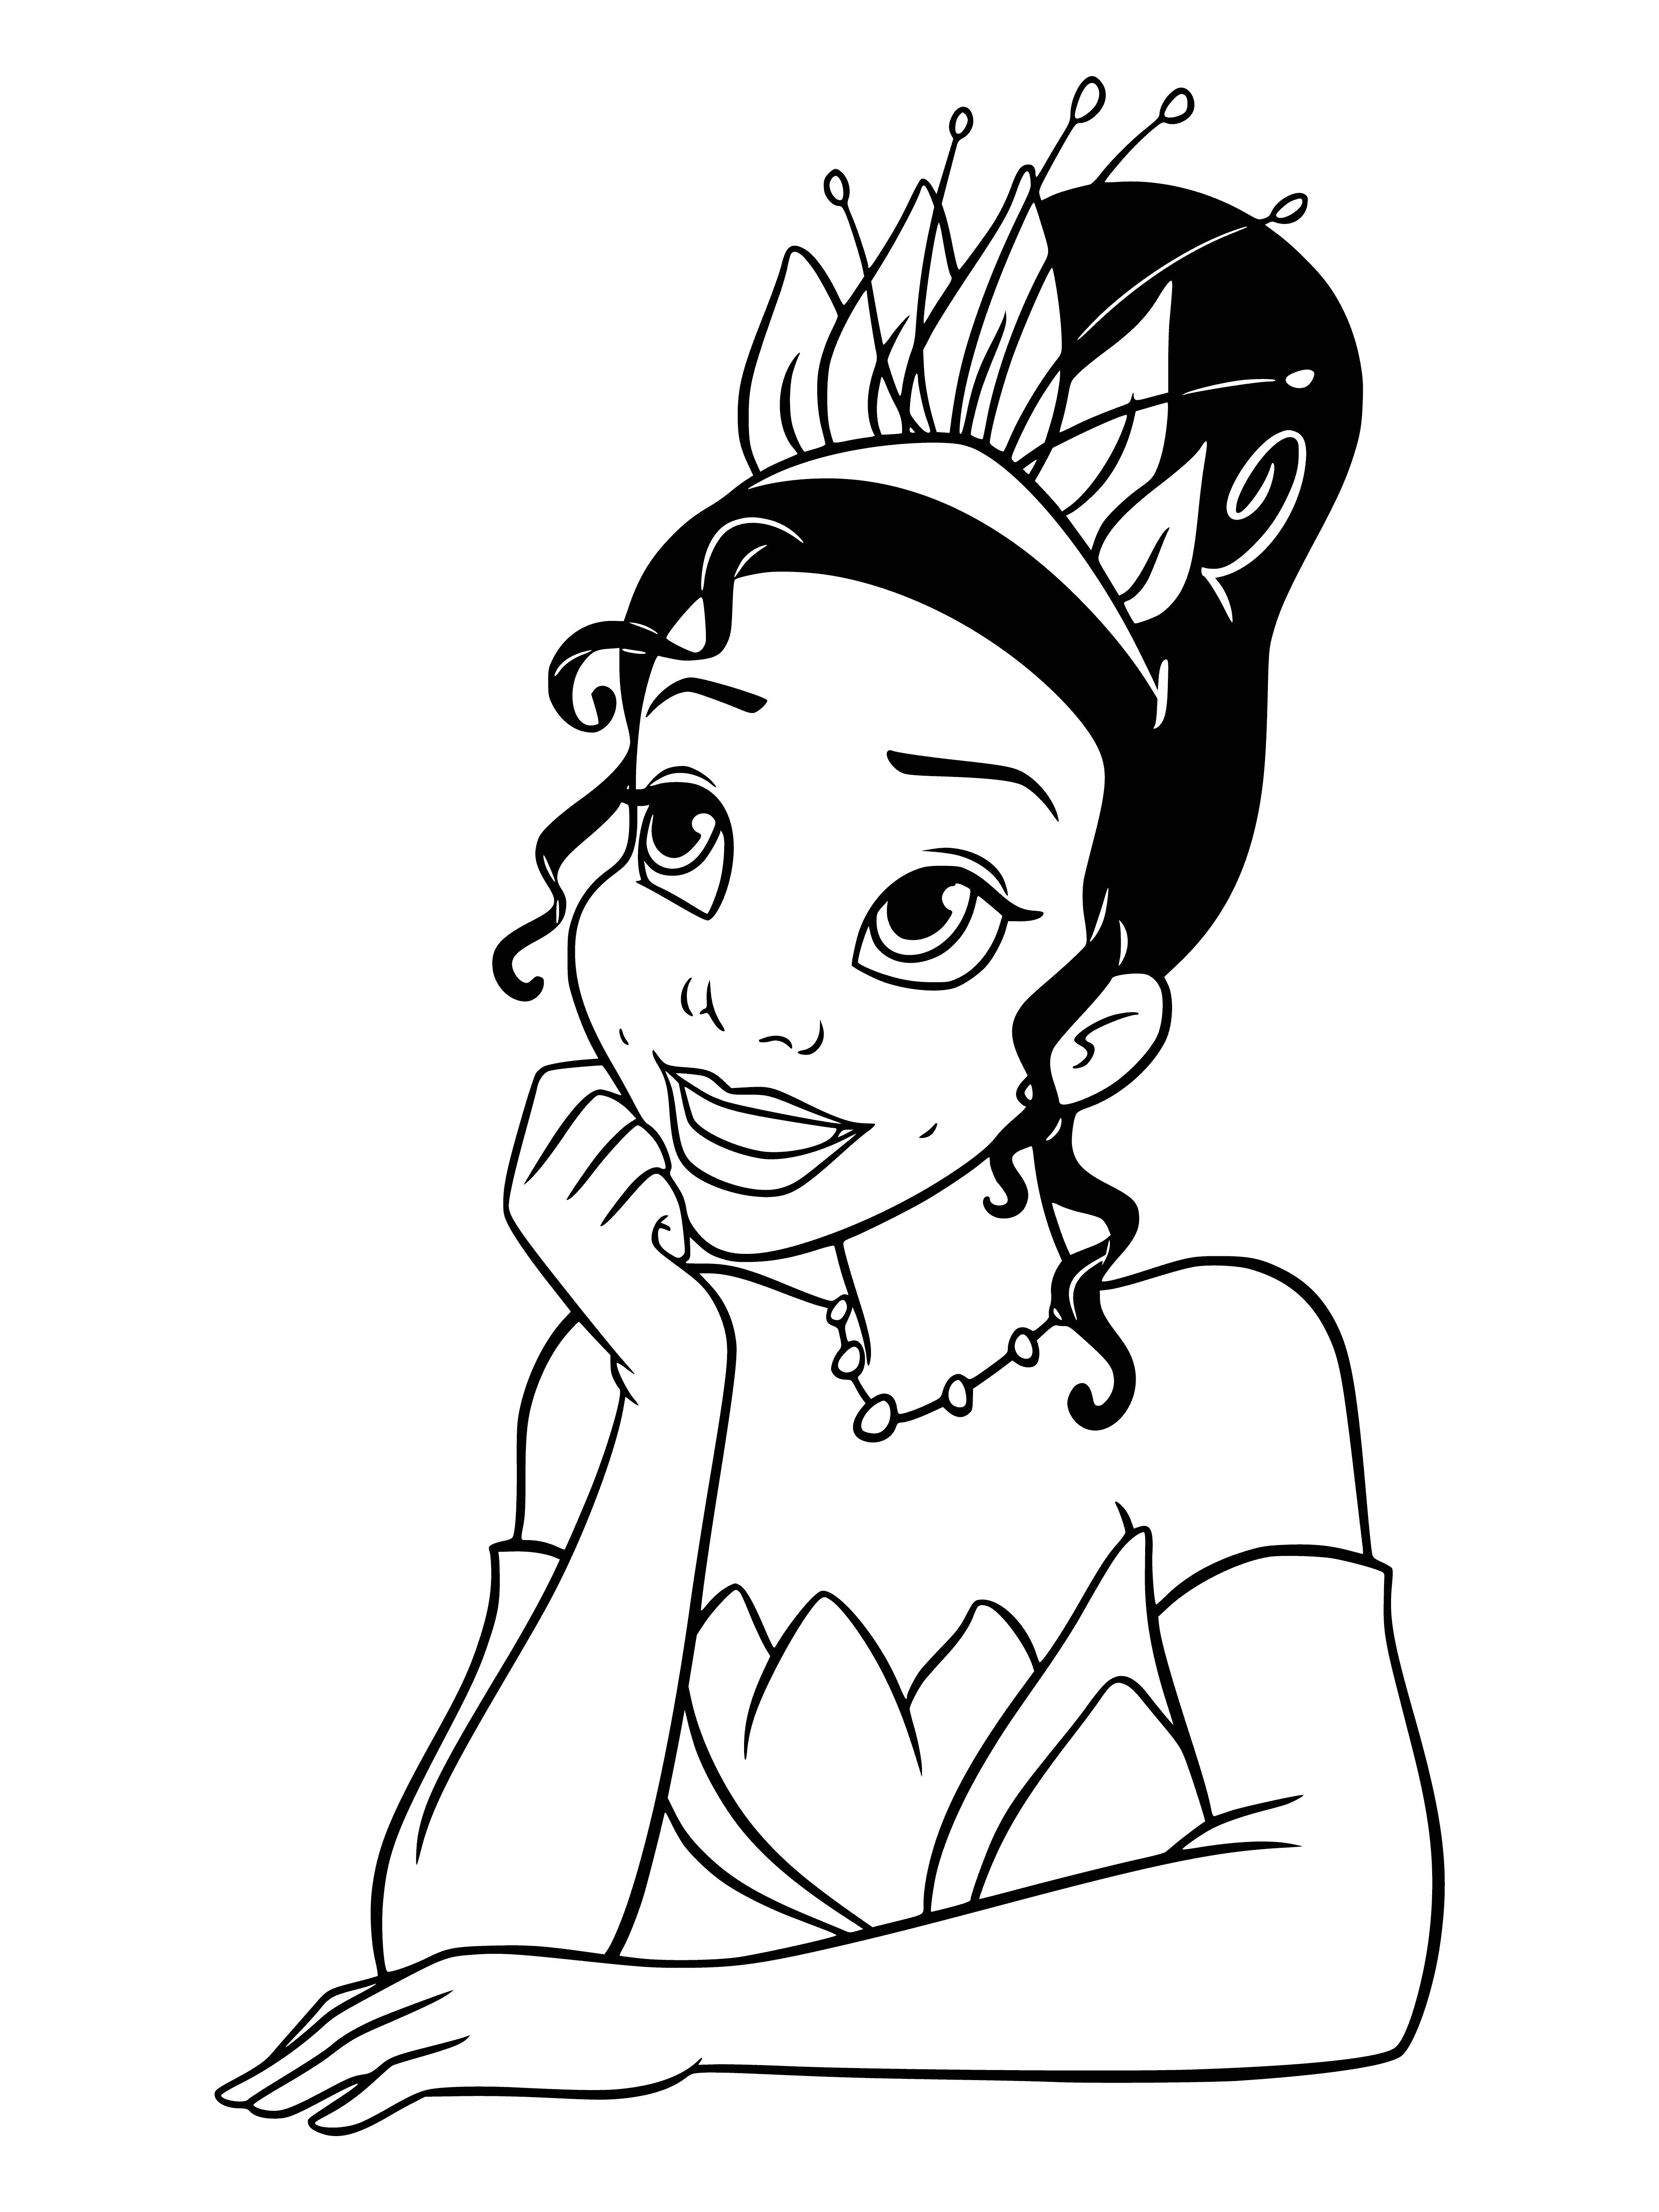 coloring page: Tiana dreams of becoming a princess with a tiara and smile in front of a castle in a beautiful dress.